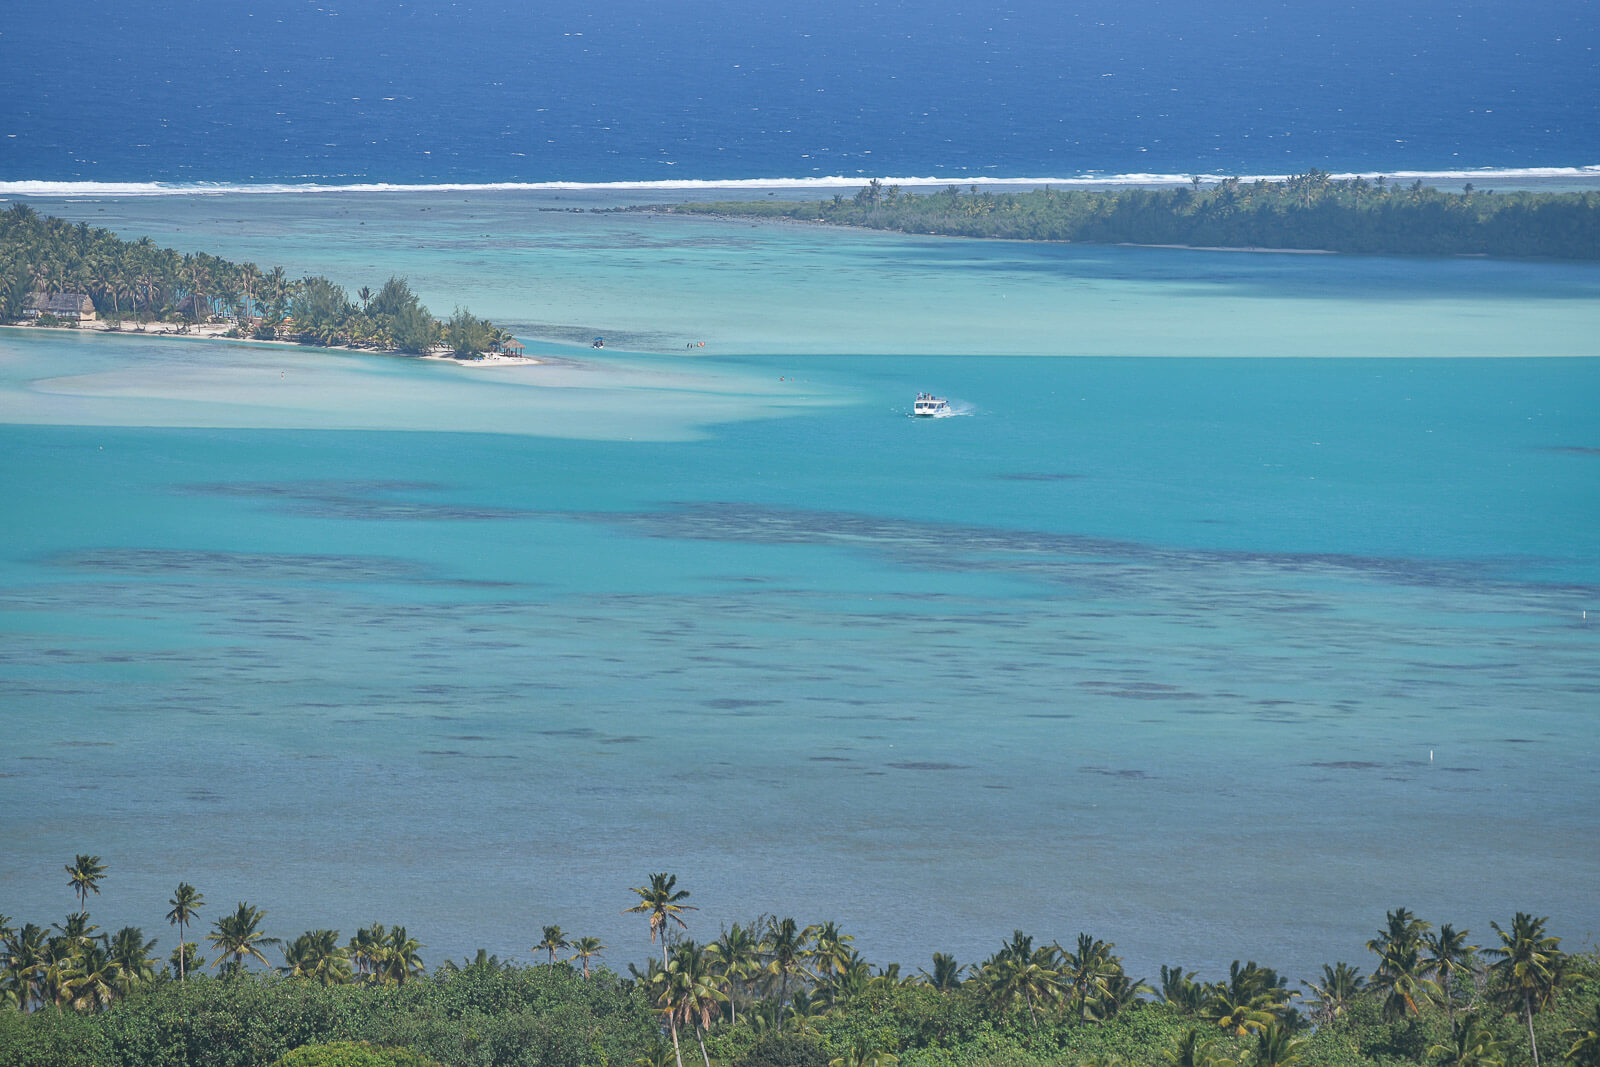 The Aitutaki Lagoon with many different shades of blue and a boat in the middle